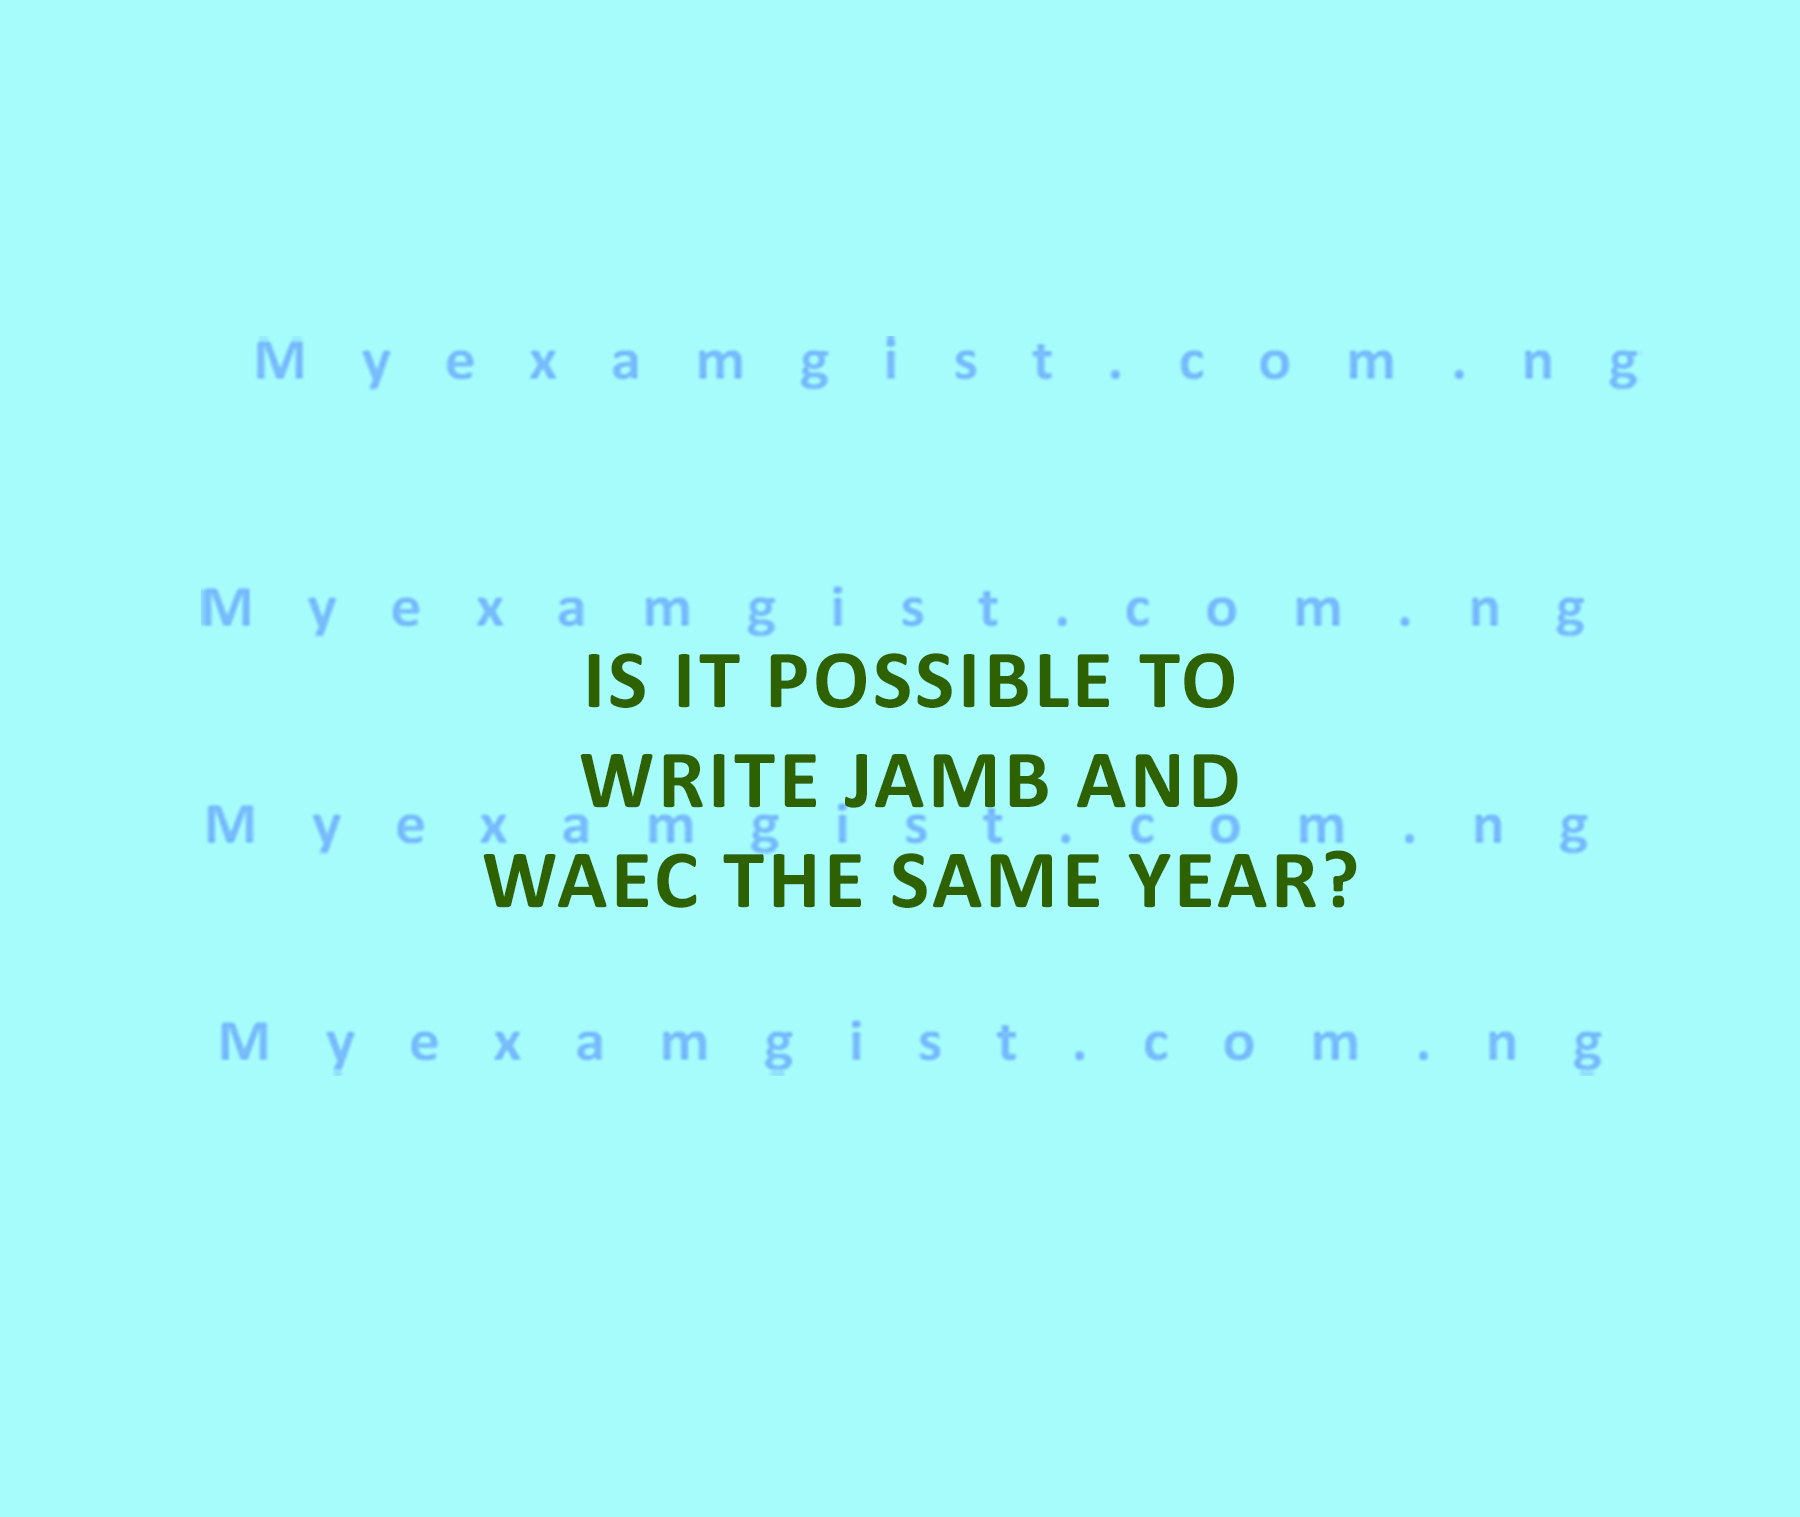 Is it possible to write JAMB and WAEC the same year?